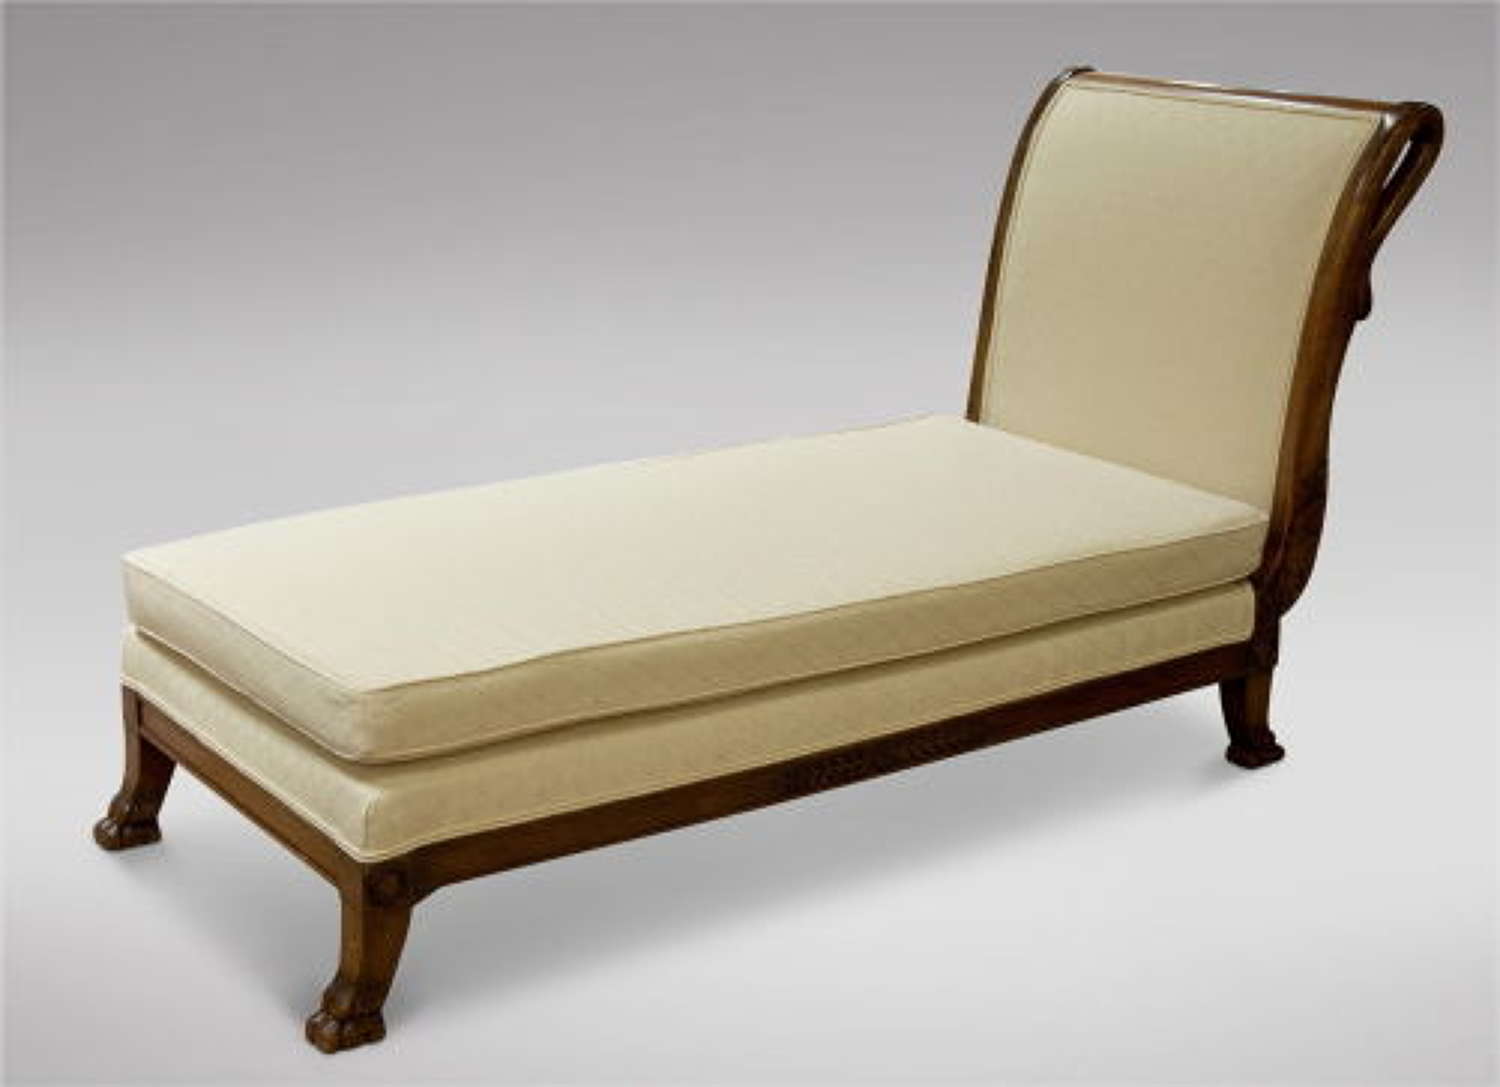 French Daybed c.1825